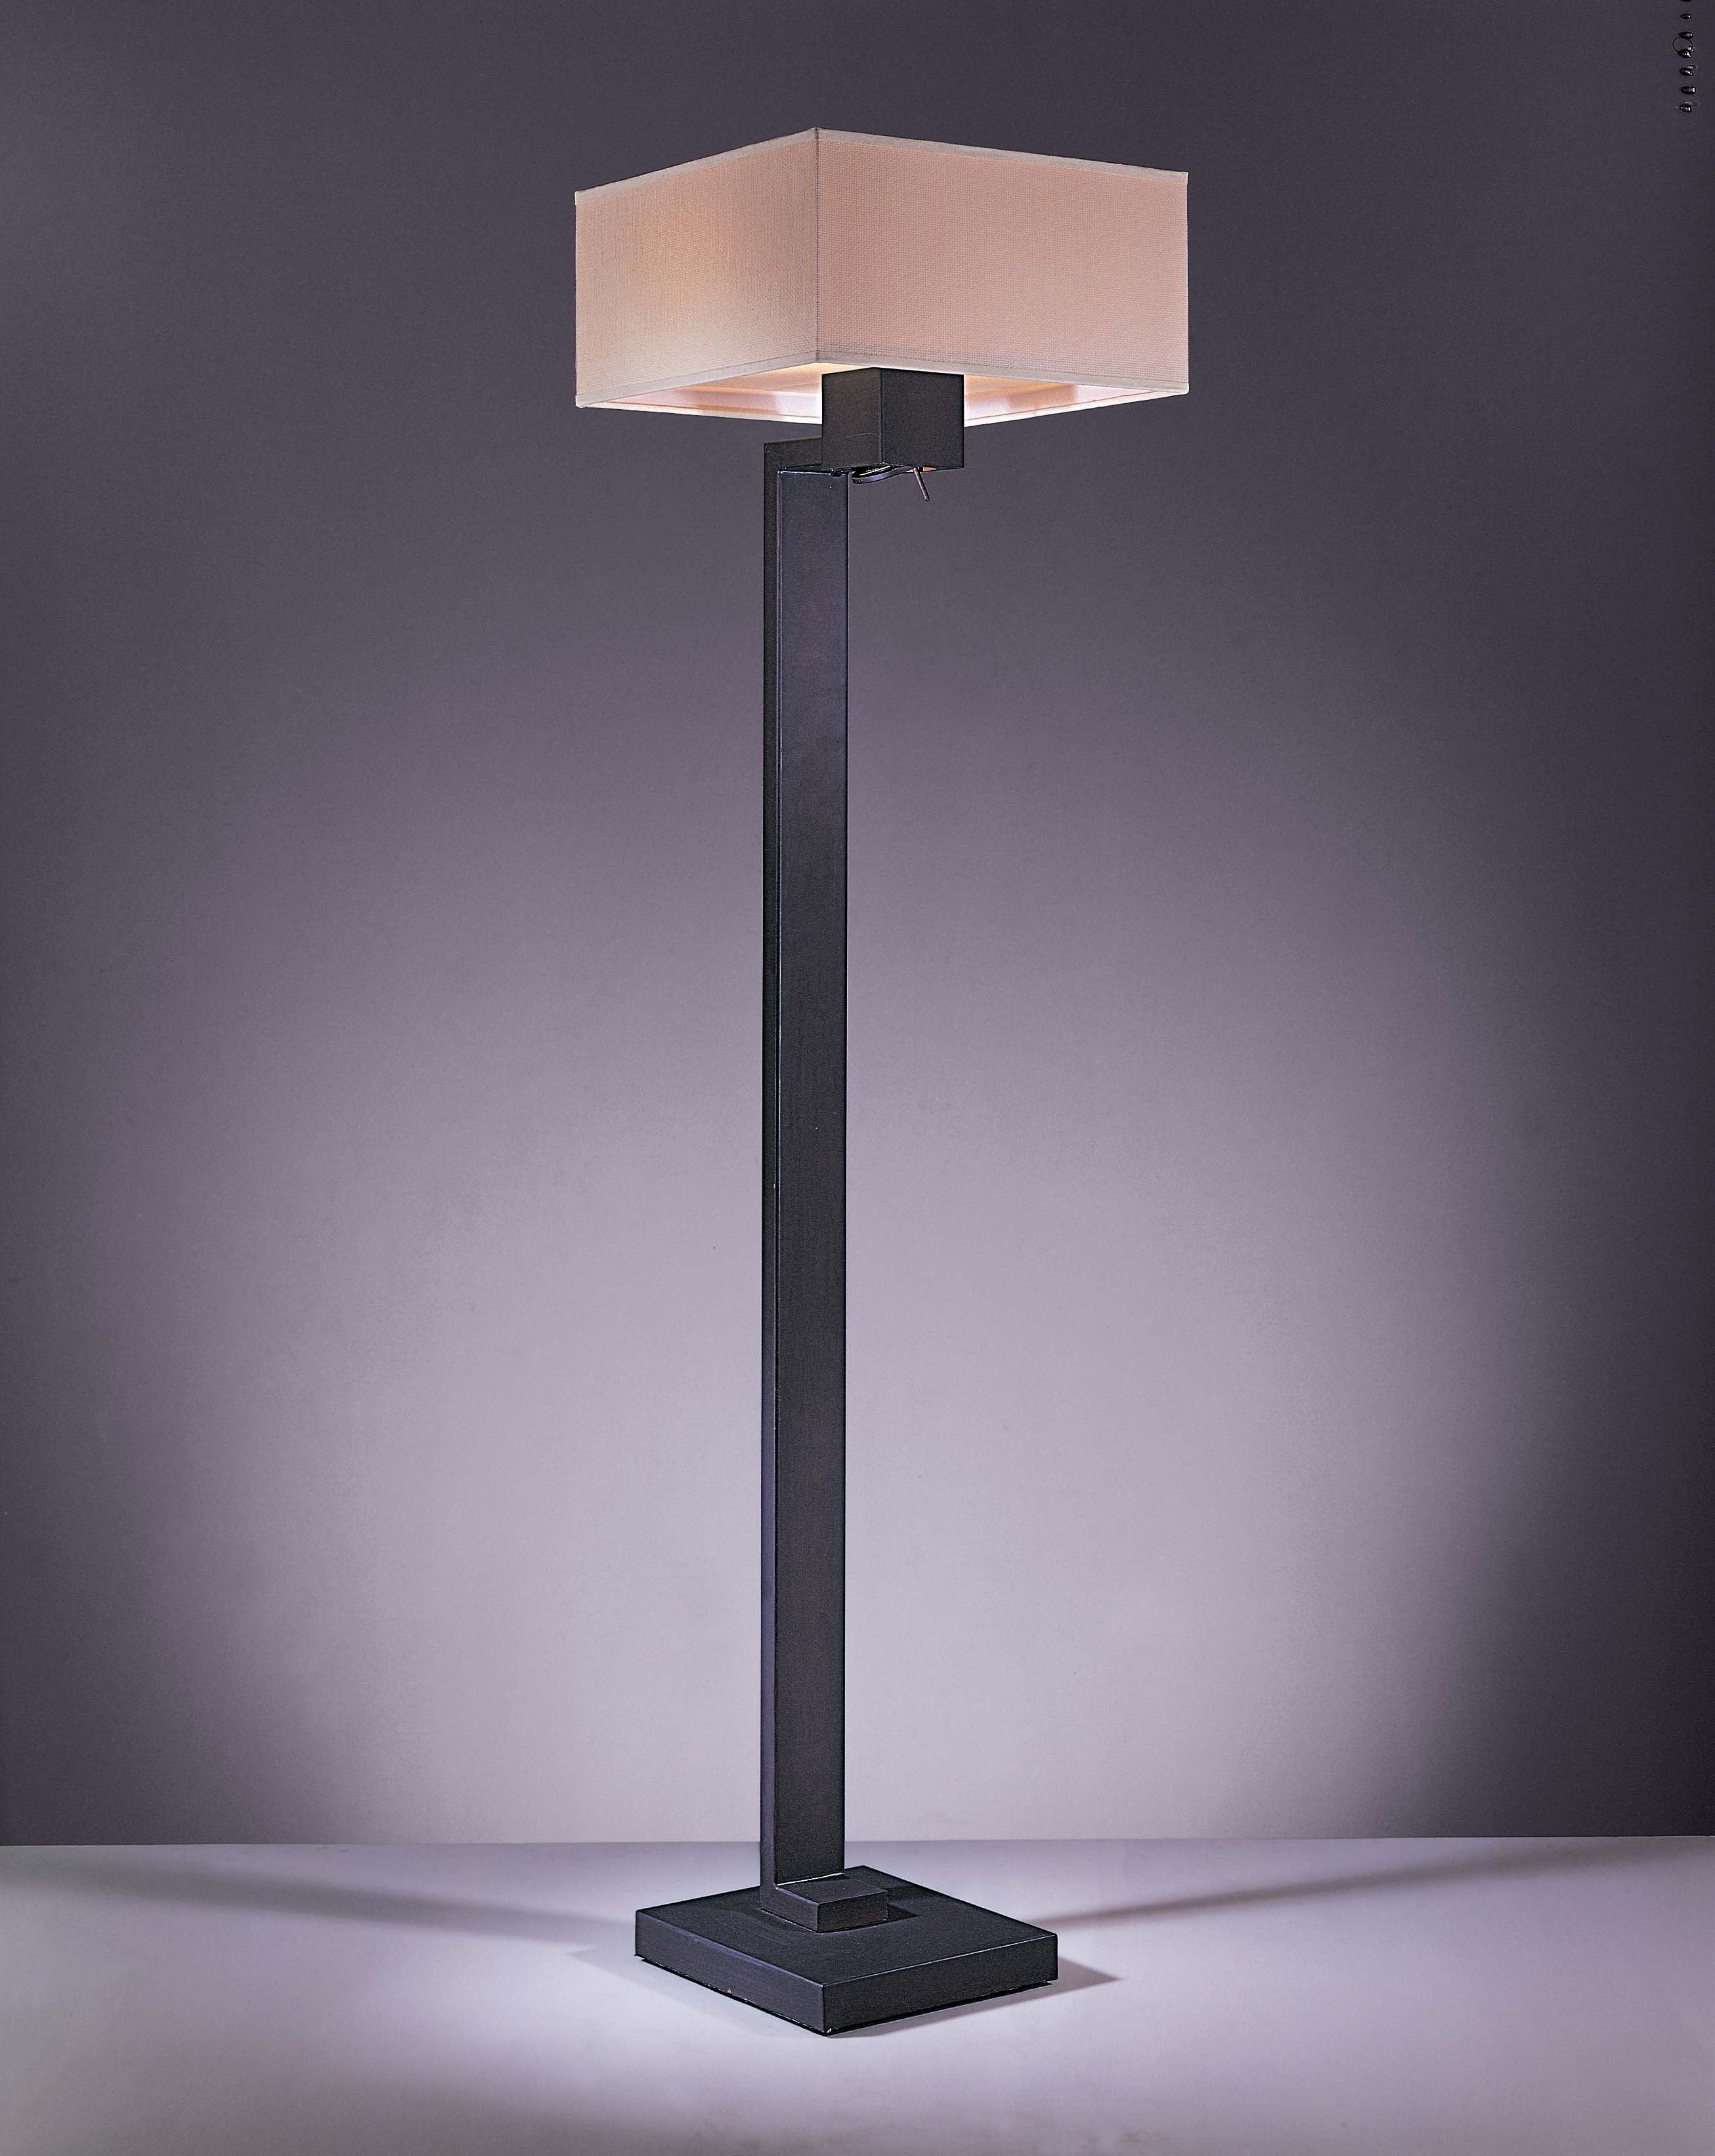 Torchiere Floor Lamps With Dimmer Contemporary Floor Lamps with regard to measurements 2612 X 3283